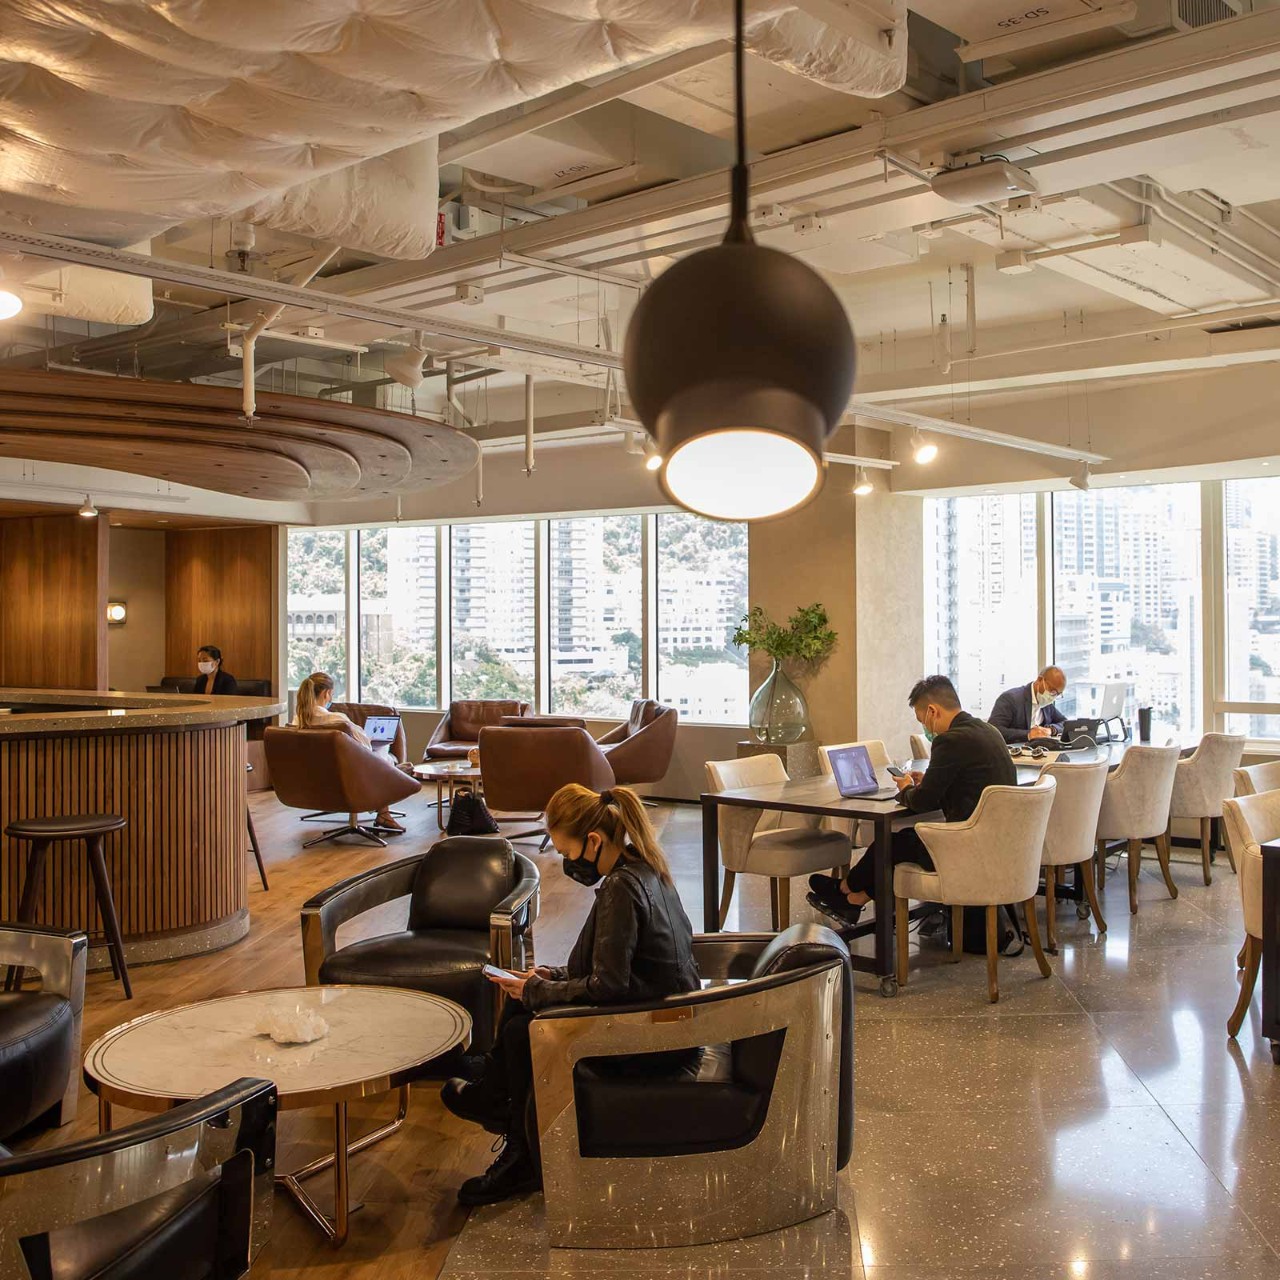 On the rise: working from a satellite office located closer to where employees live